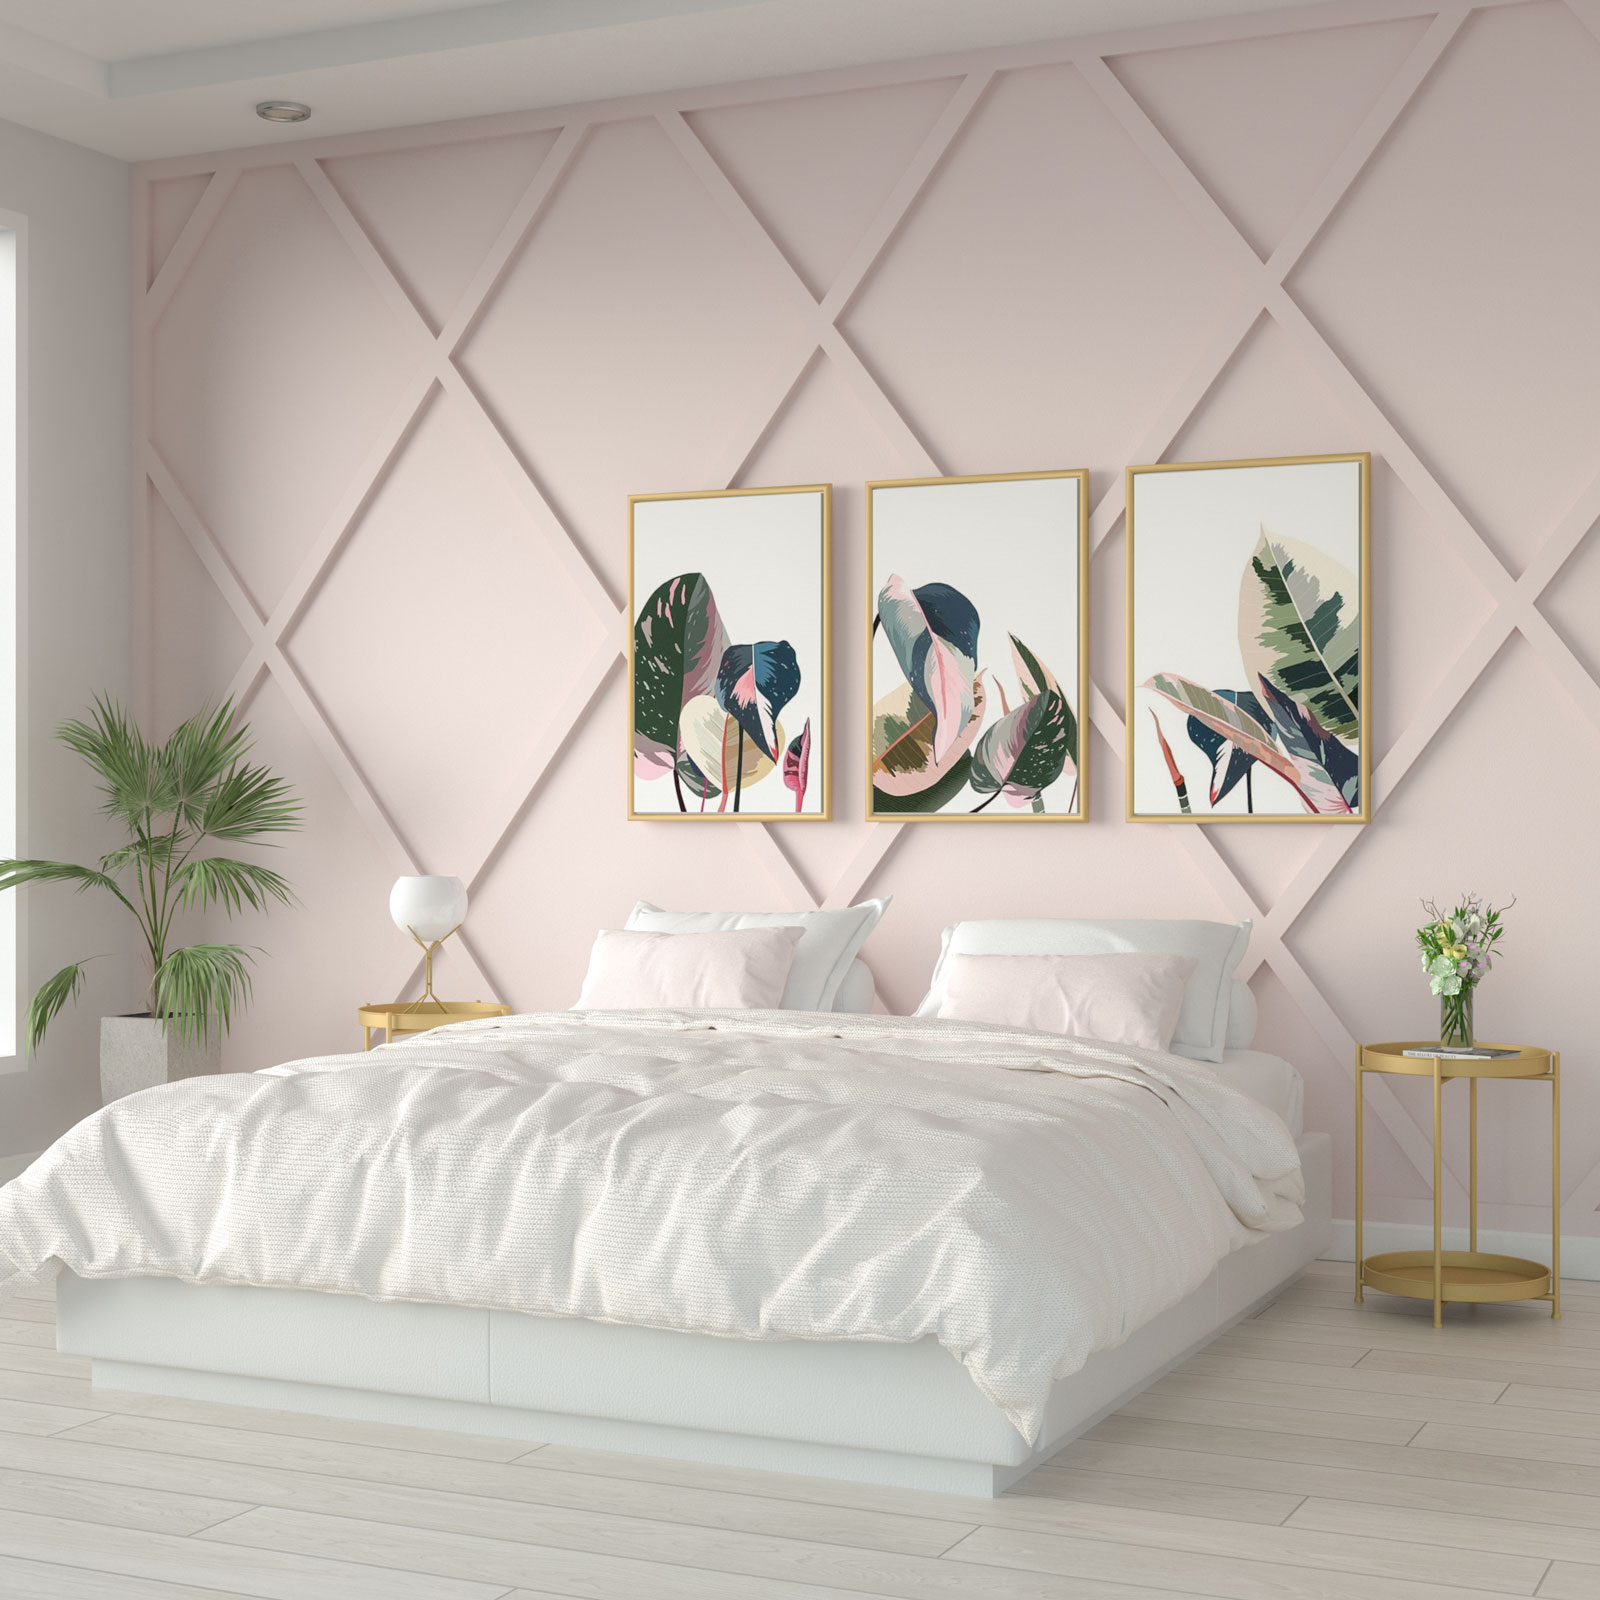 Bedroom with amour pink wall